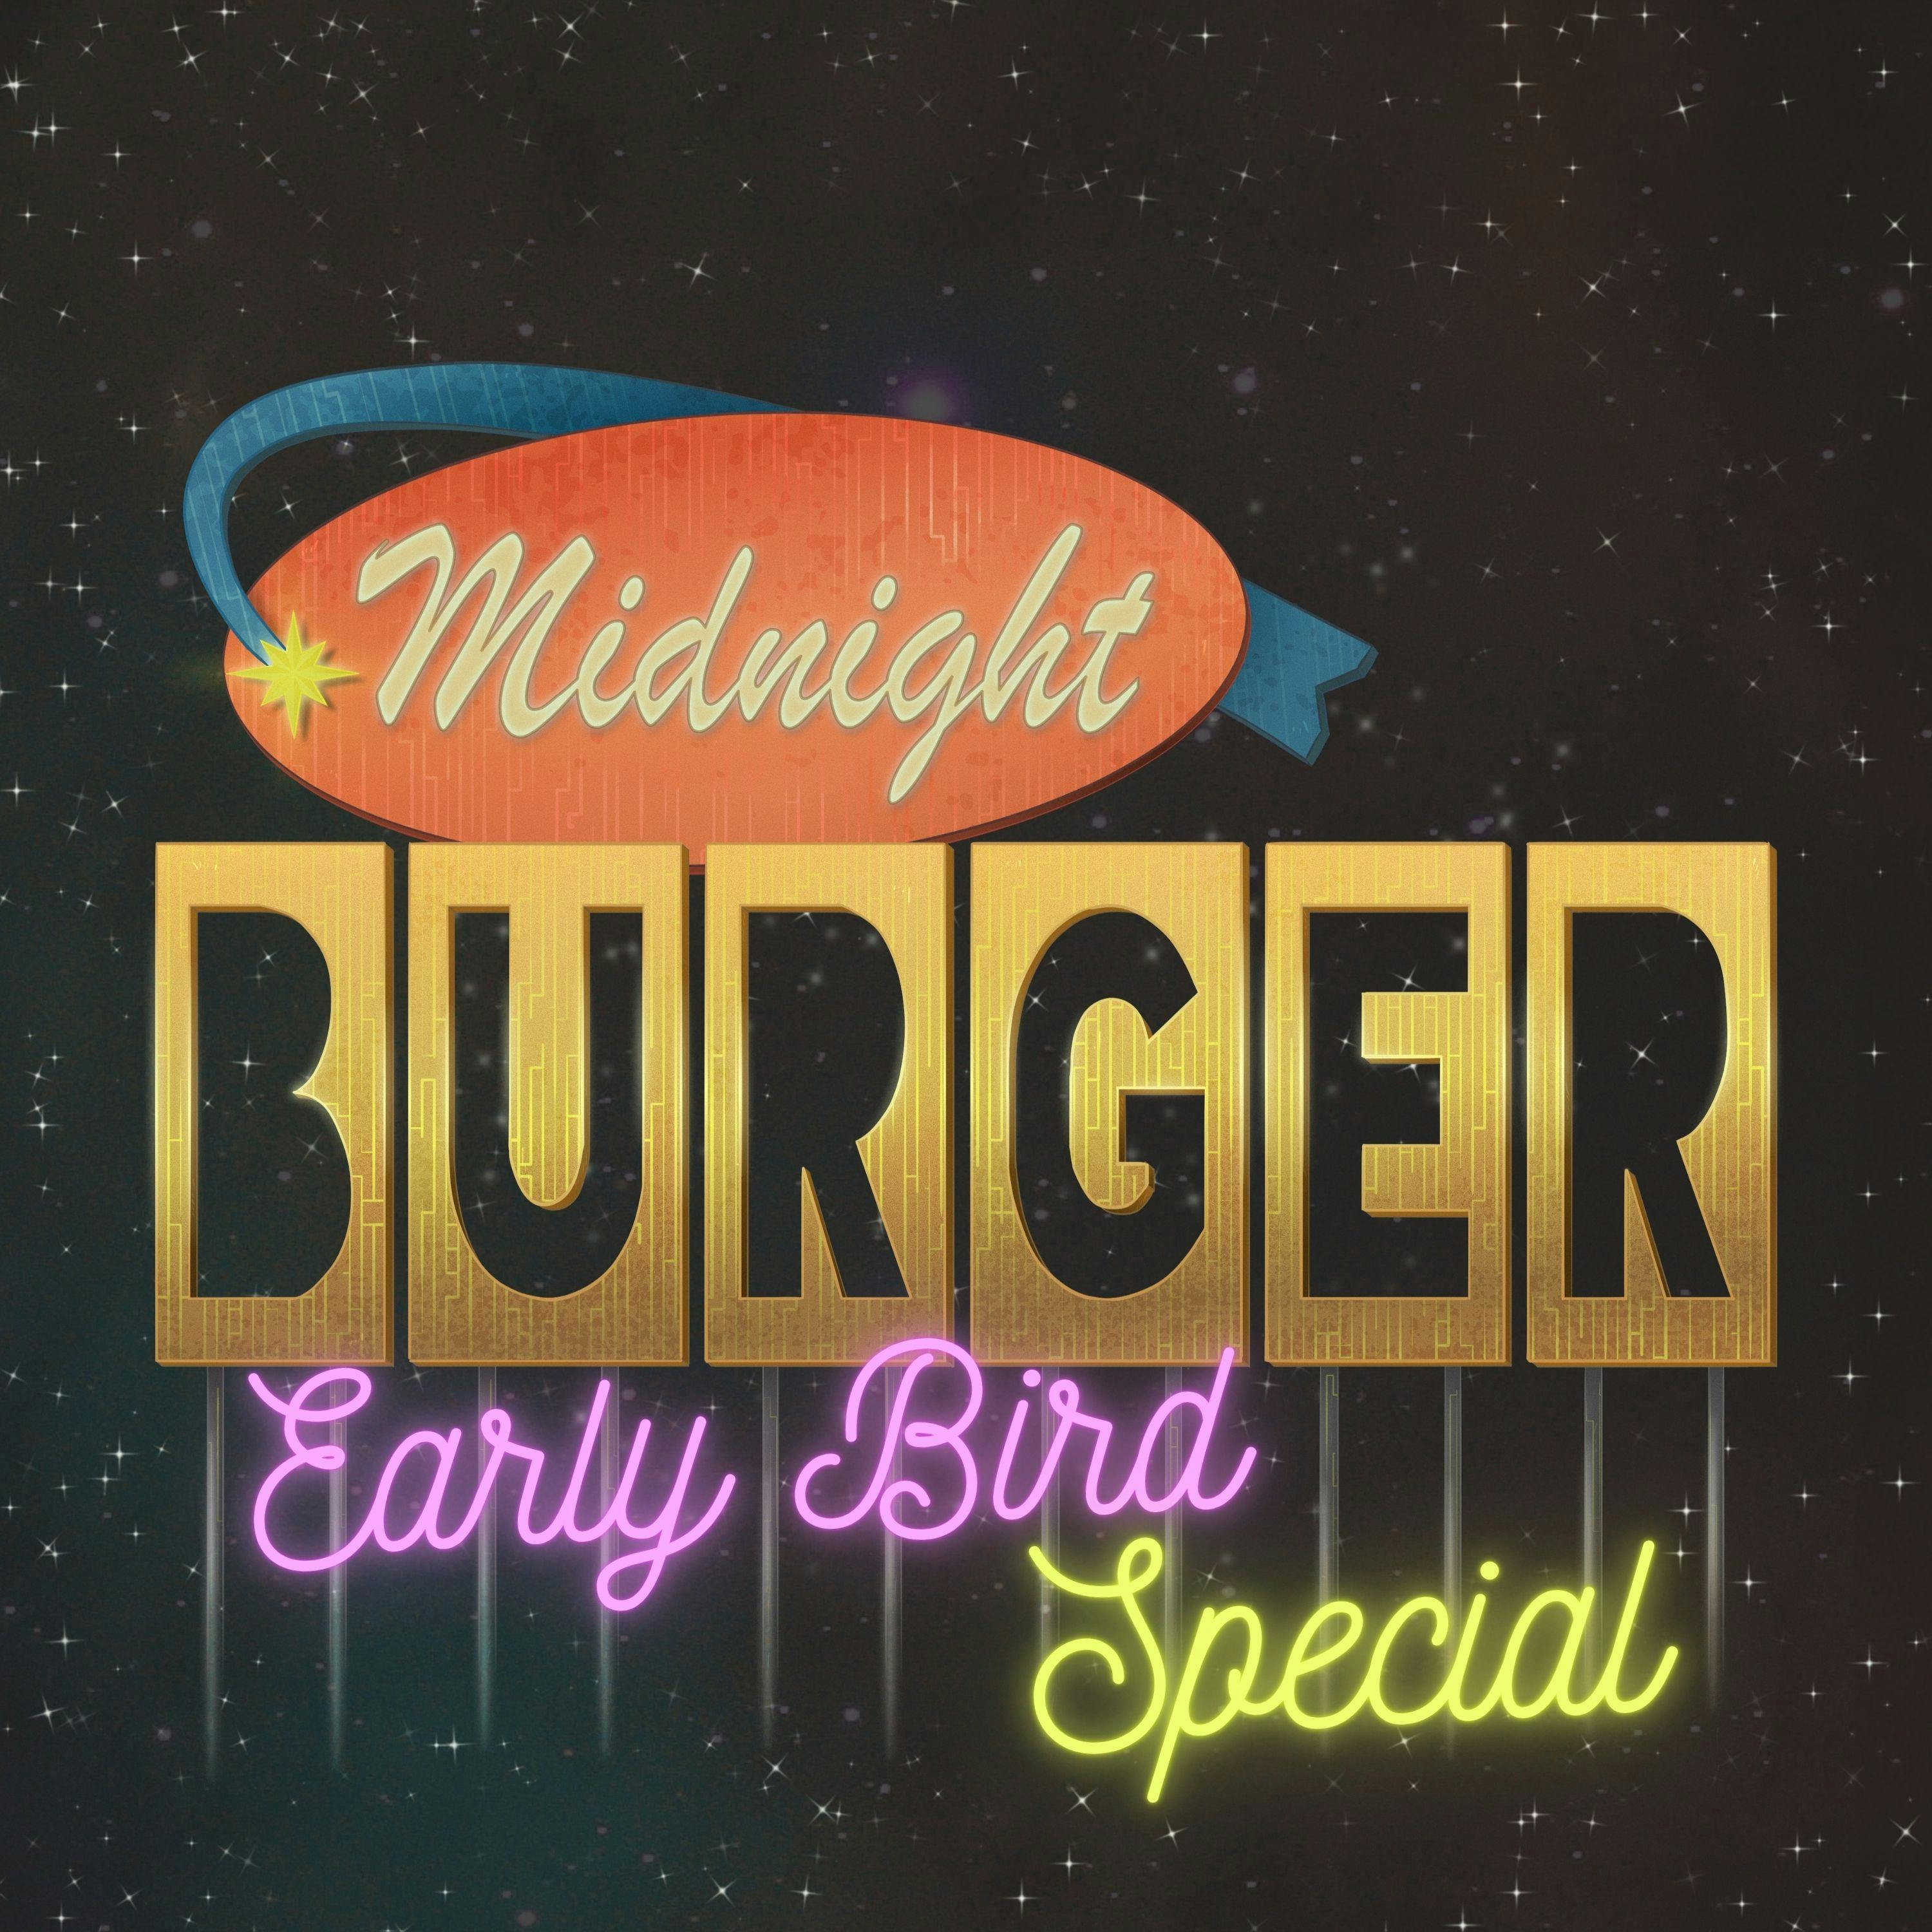 The Midnight Burger Early Bird Special! podcast tile